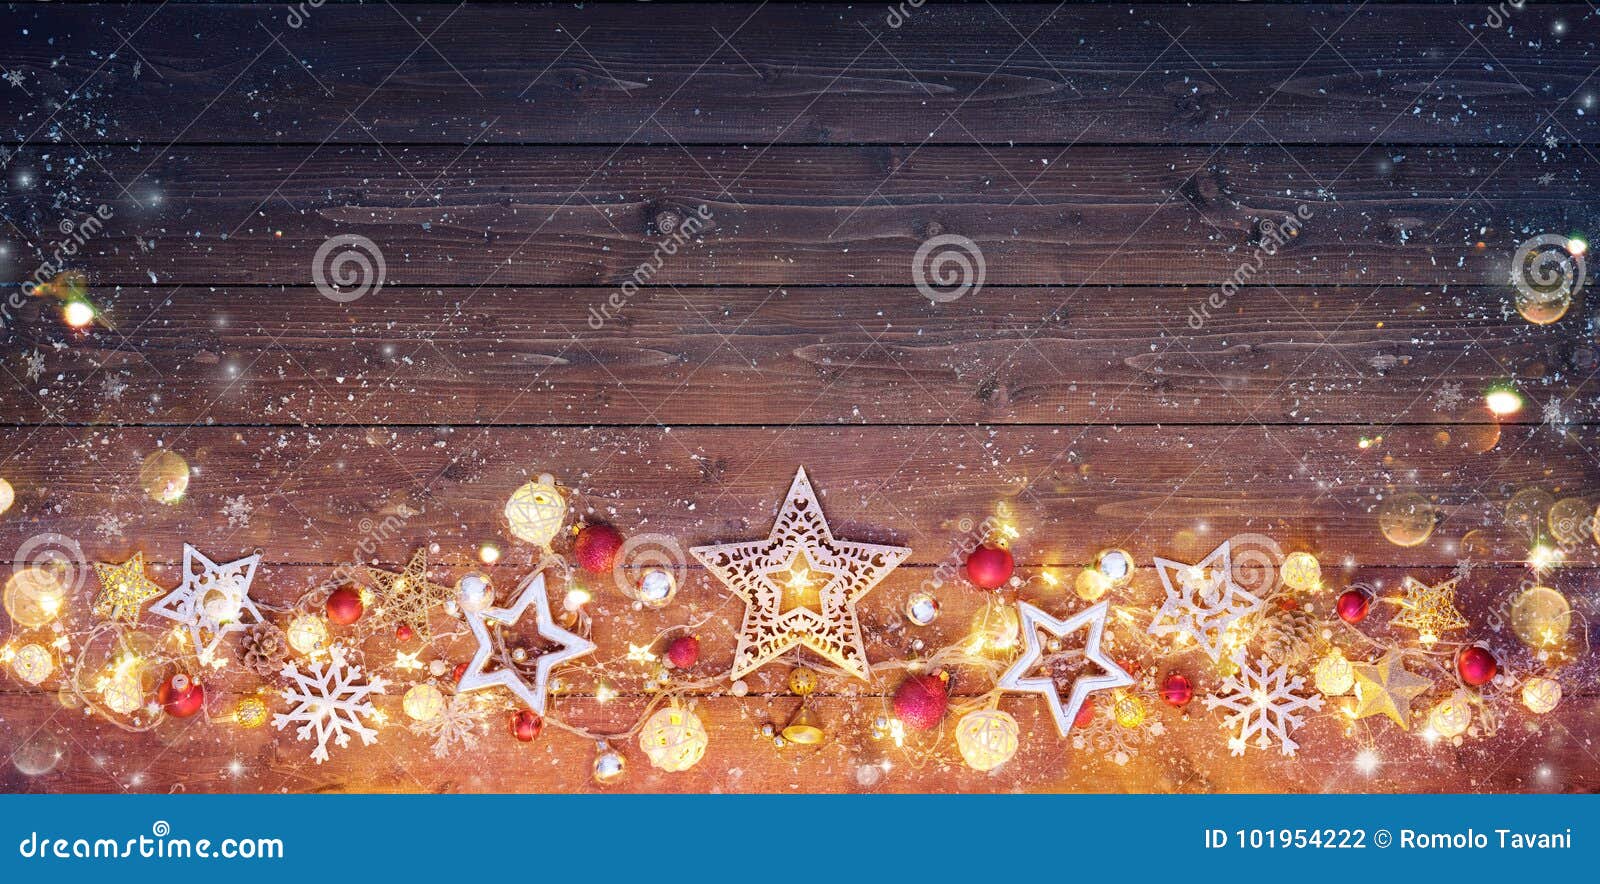 Christmas Vintage Card - Decoration and Lights Stock Photo - Image of ...